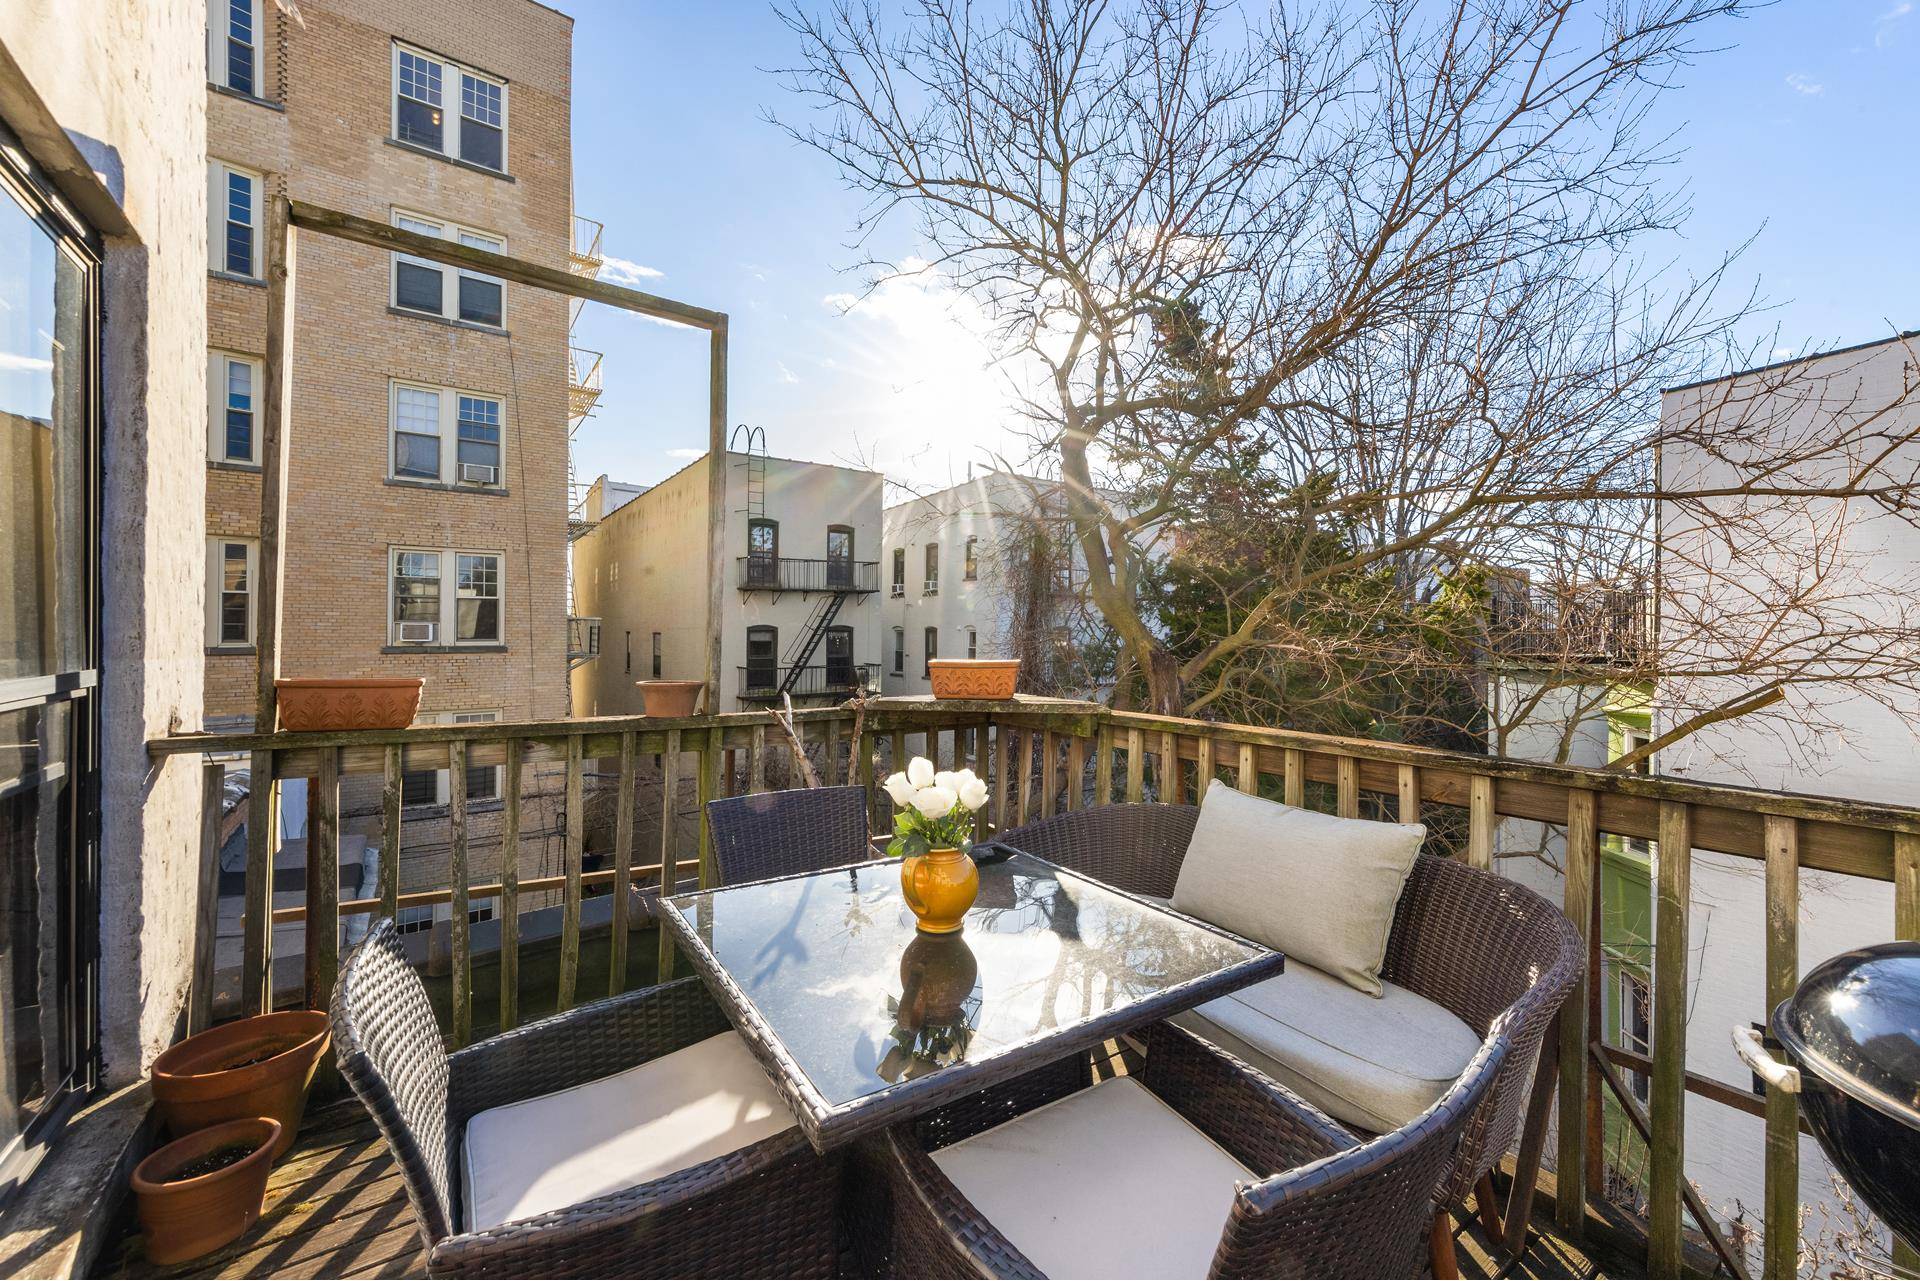 Spacious, sunny and bright best describes apartment two at 120 Prospect Park West.